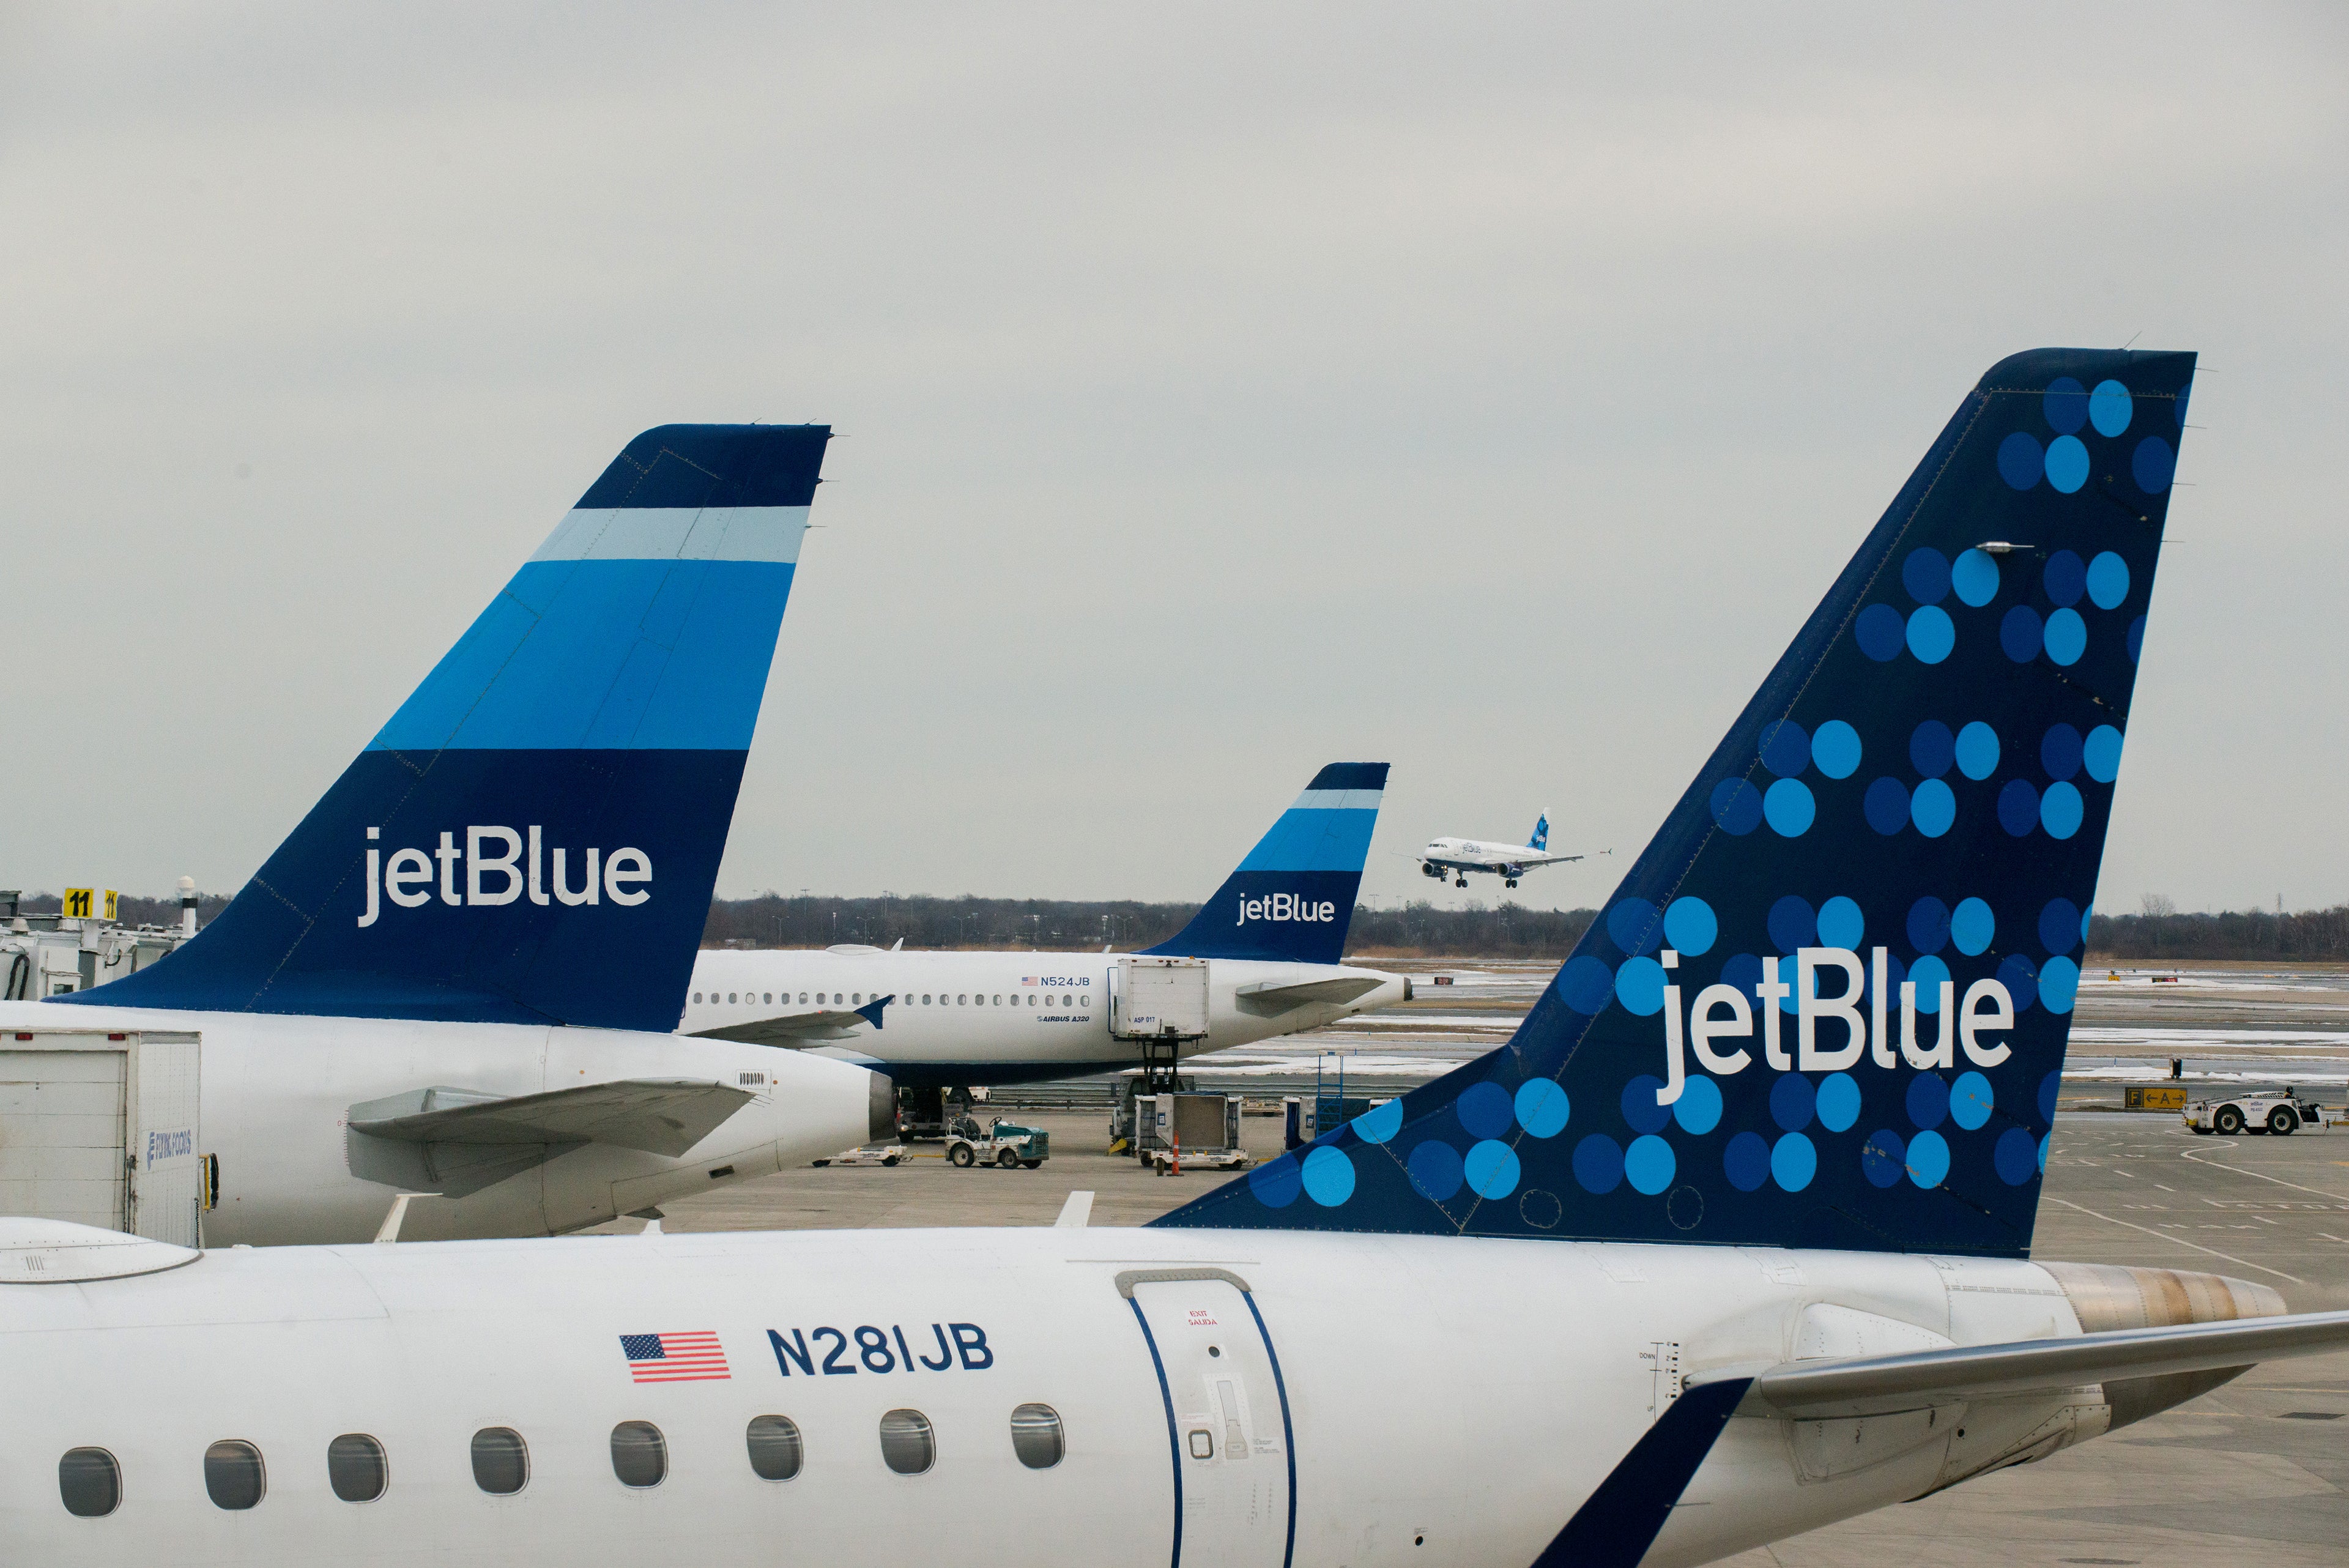 Operations At JetBlue Airways Corp.'s Terminal 5 Ahead of Earnings Figures